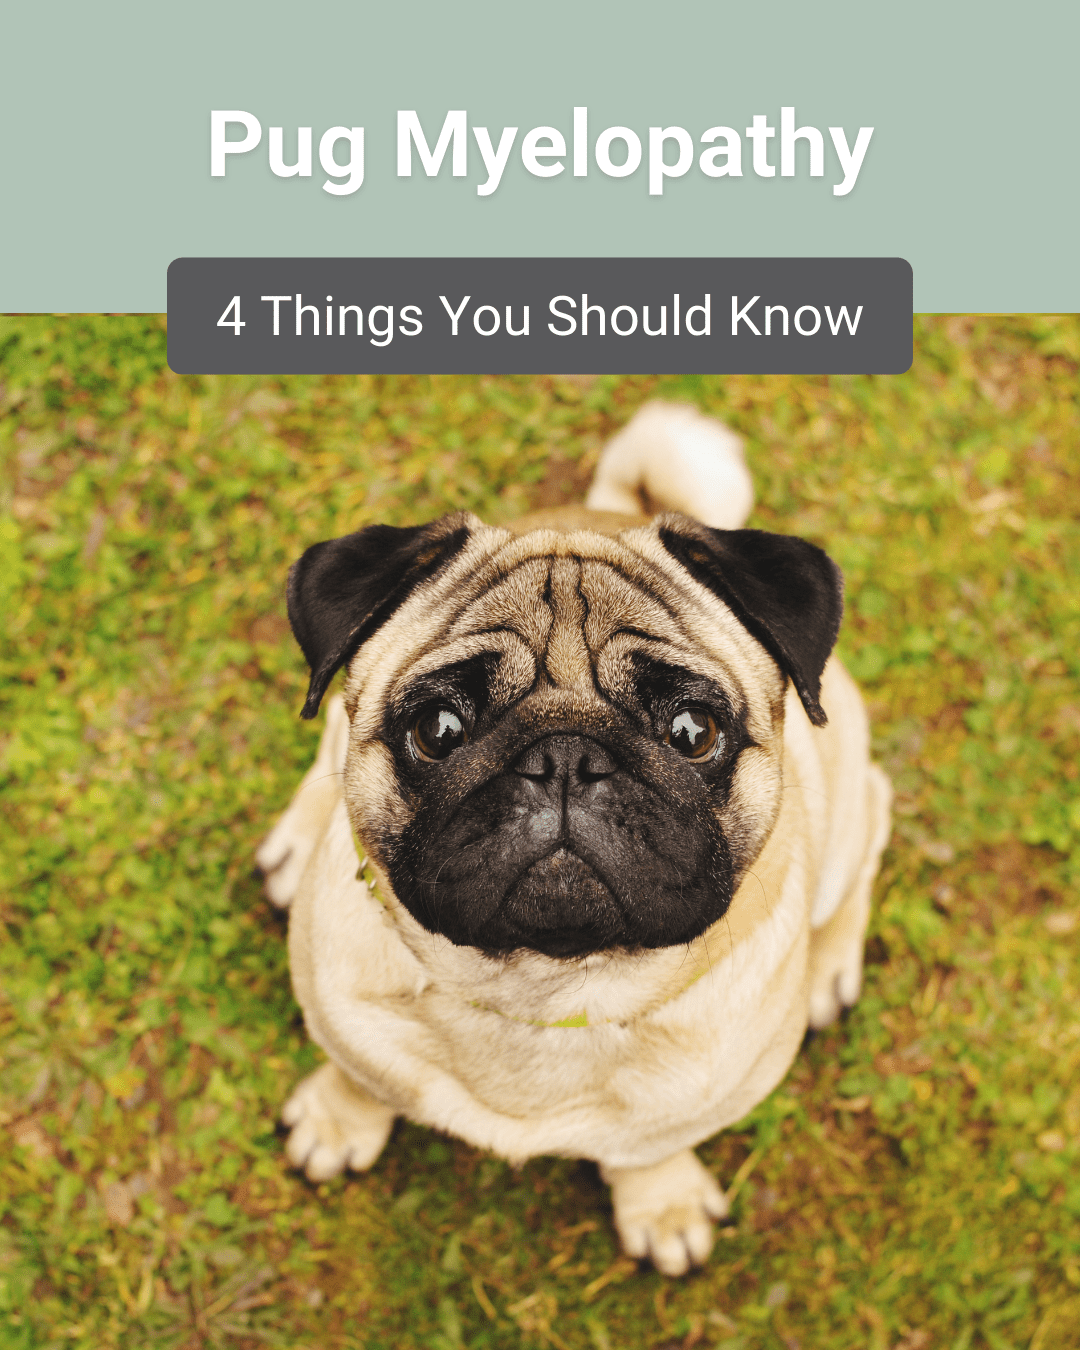 4 Things You Should Know about Pug Myelopathy